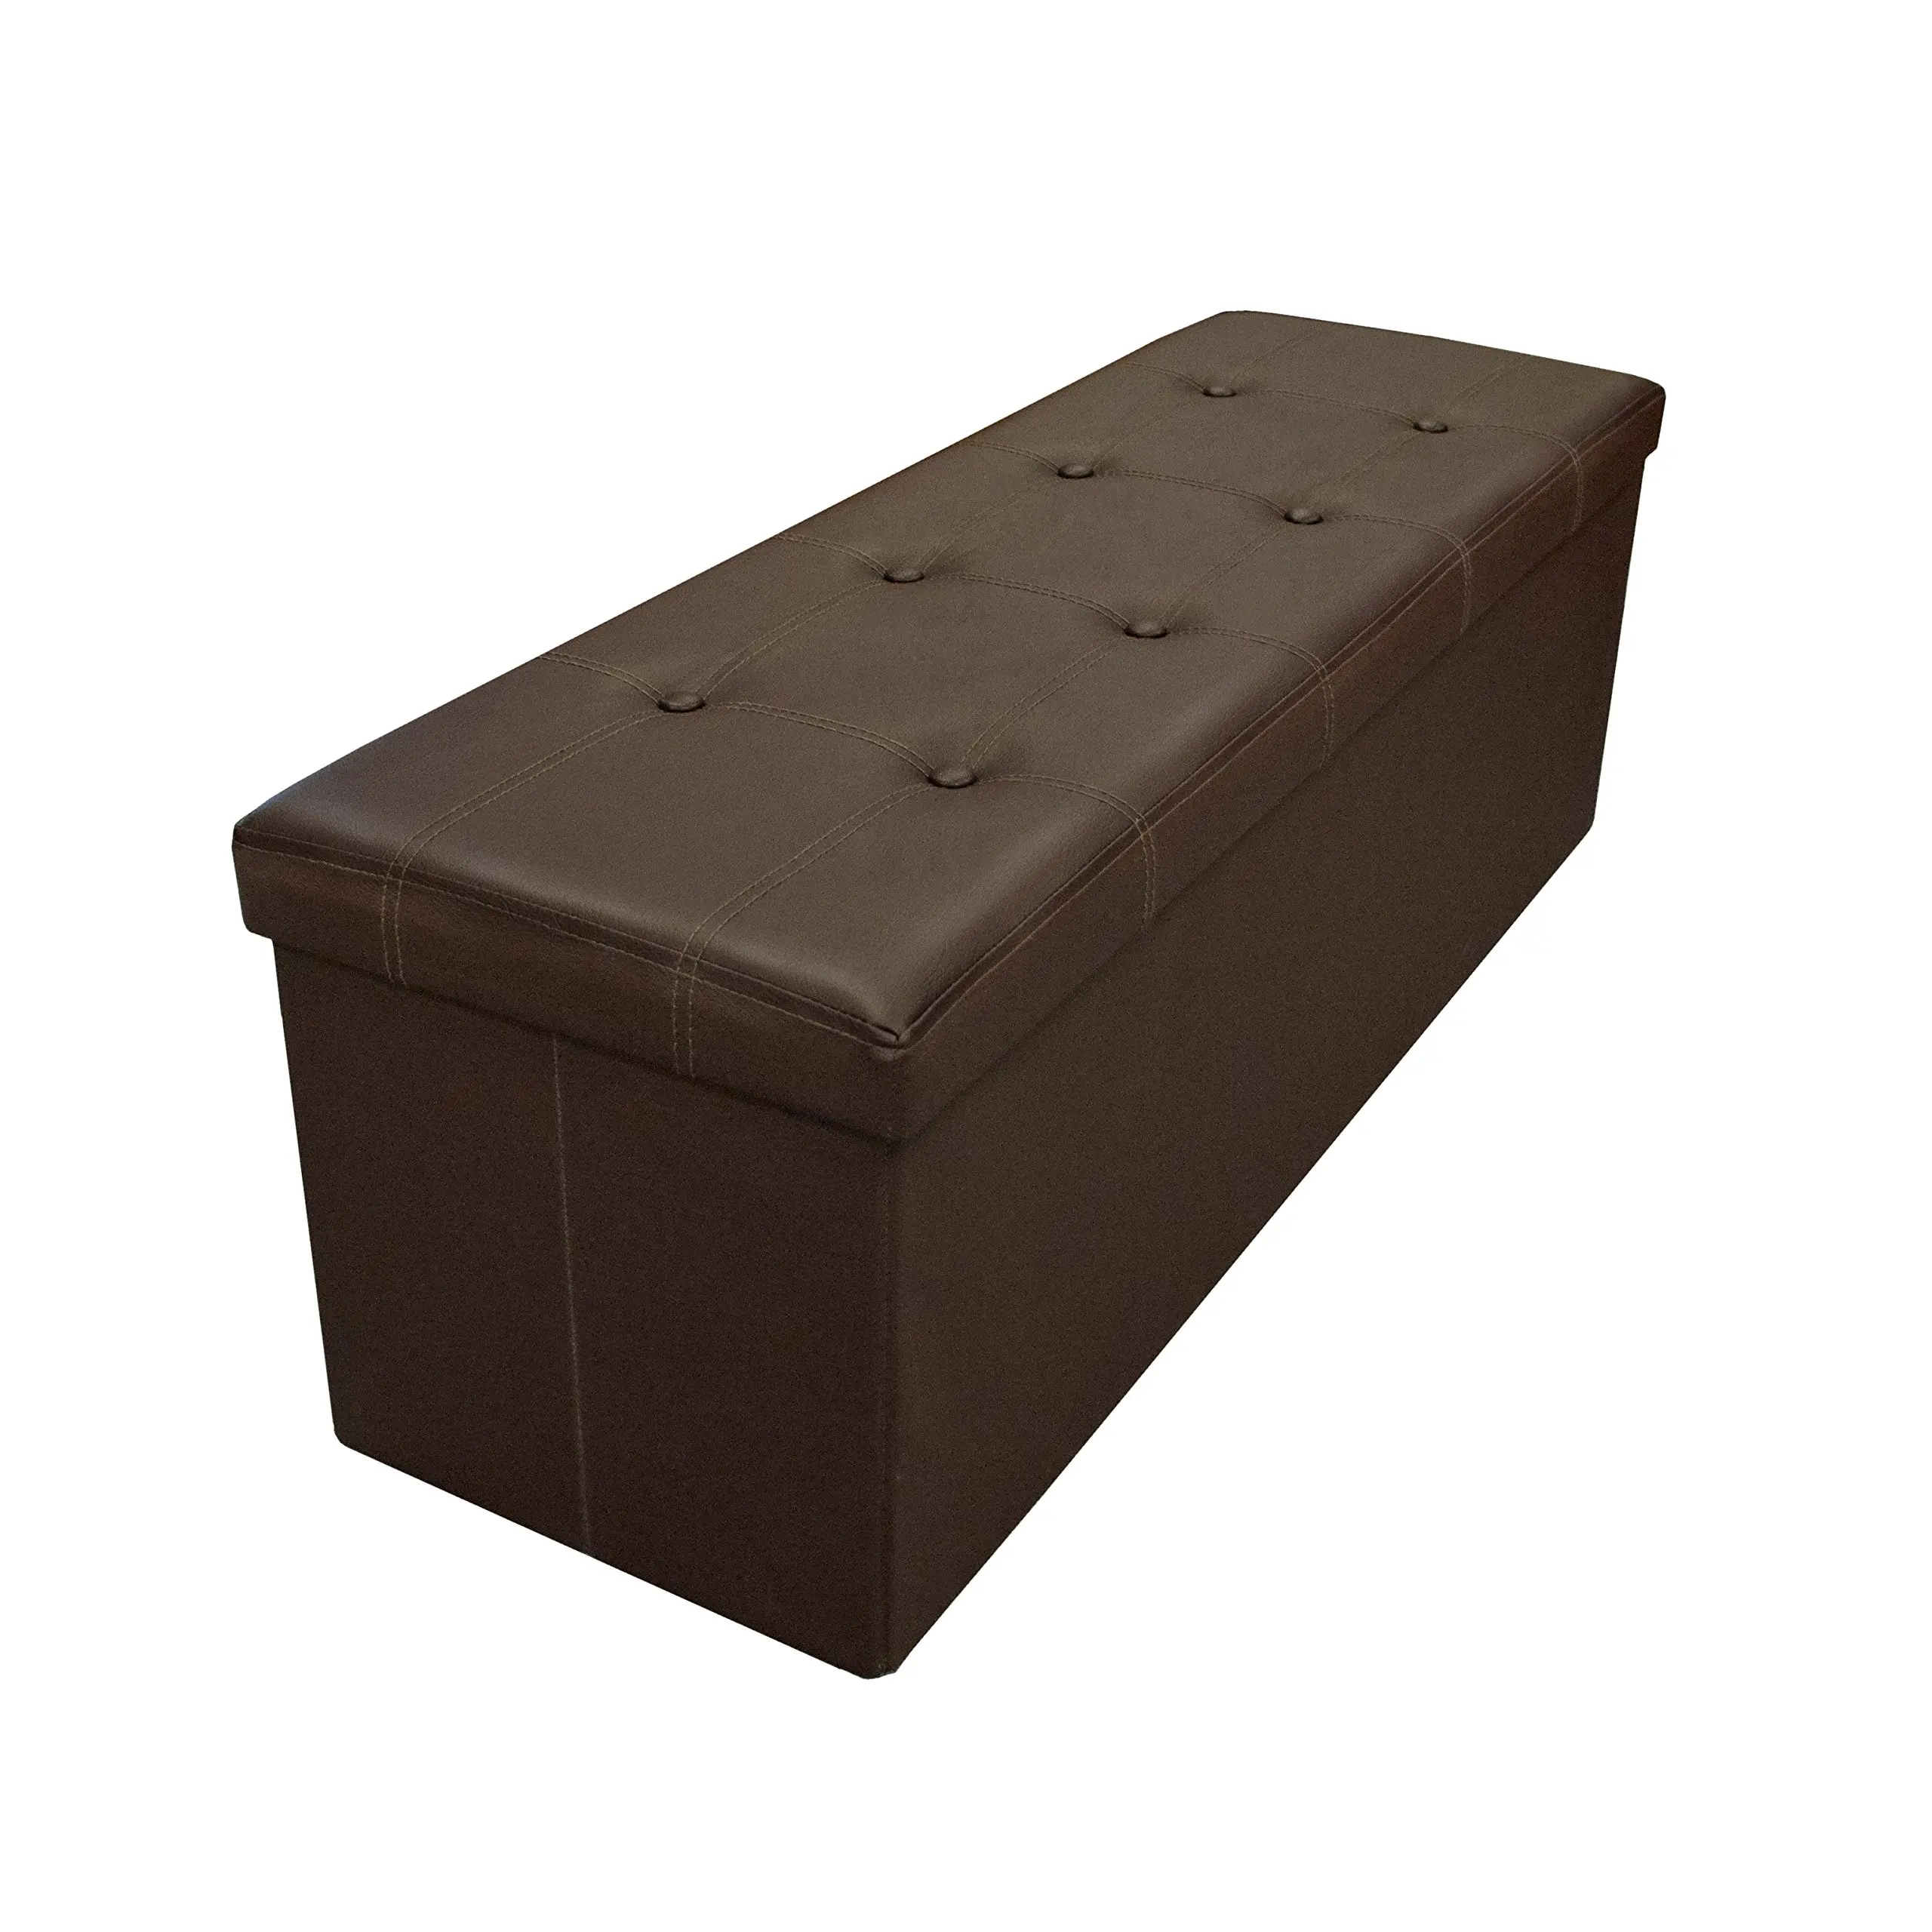 Cheap Bench Seat Ottoman, find Bench Seat Ottoman deals on line at